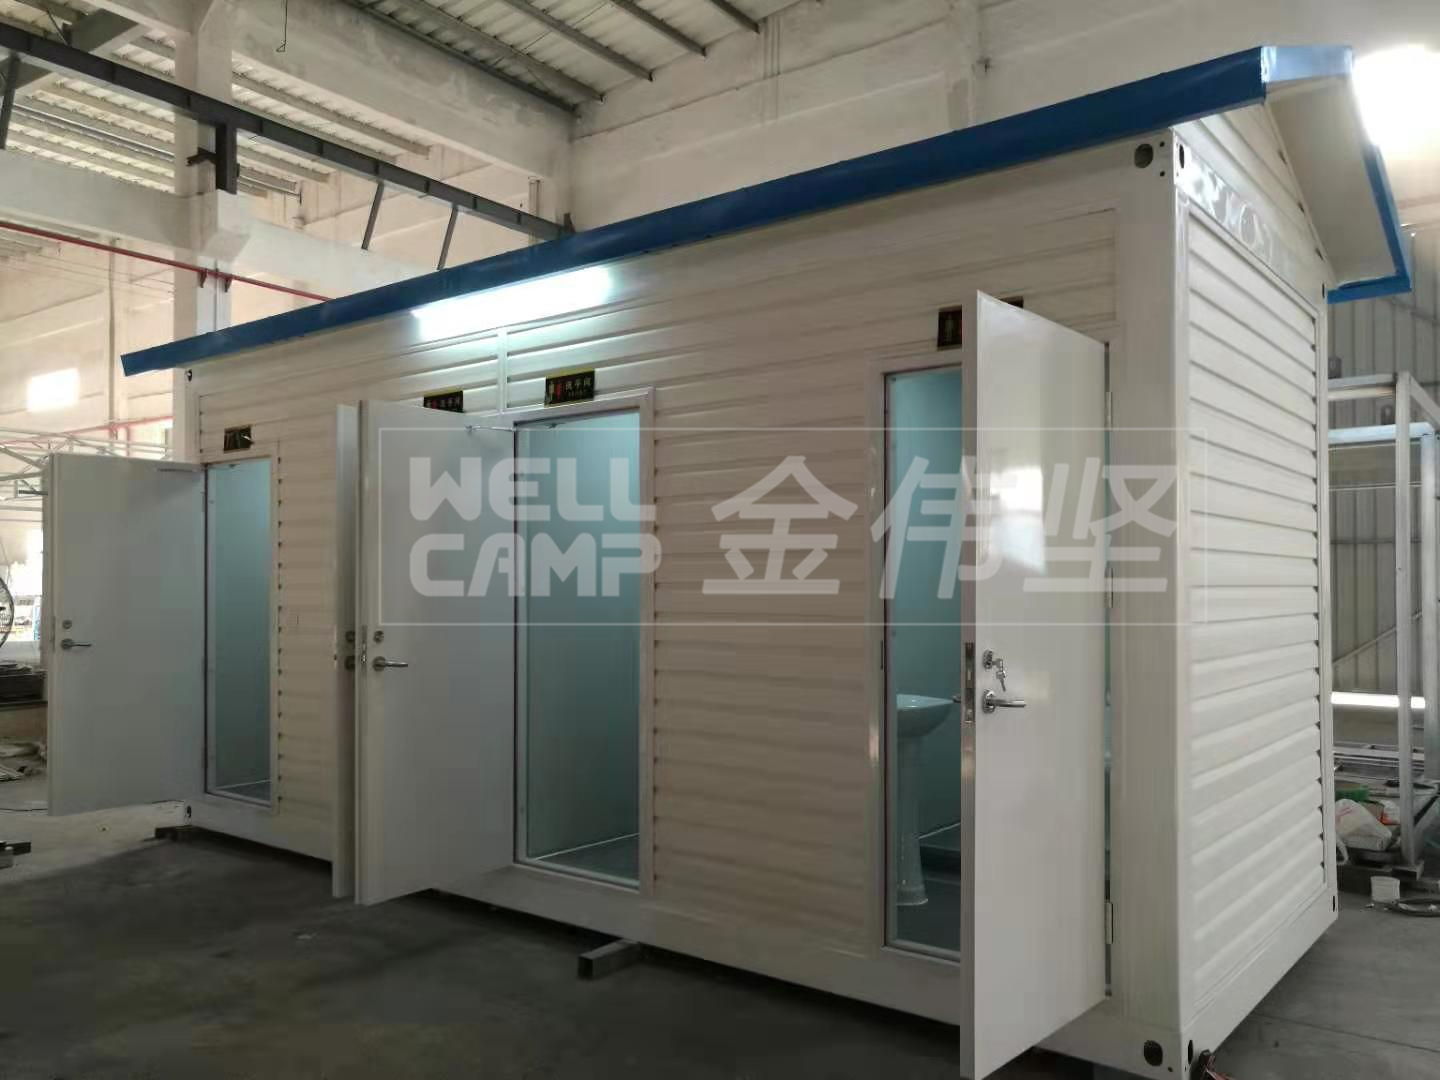 news-6 Applications Flat Pack Container House Capable Of-WELLCAMP, WELLCAMP prefab house, WELLCAMP c-1